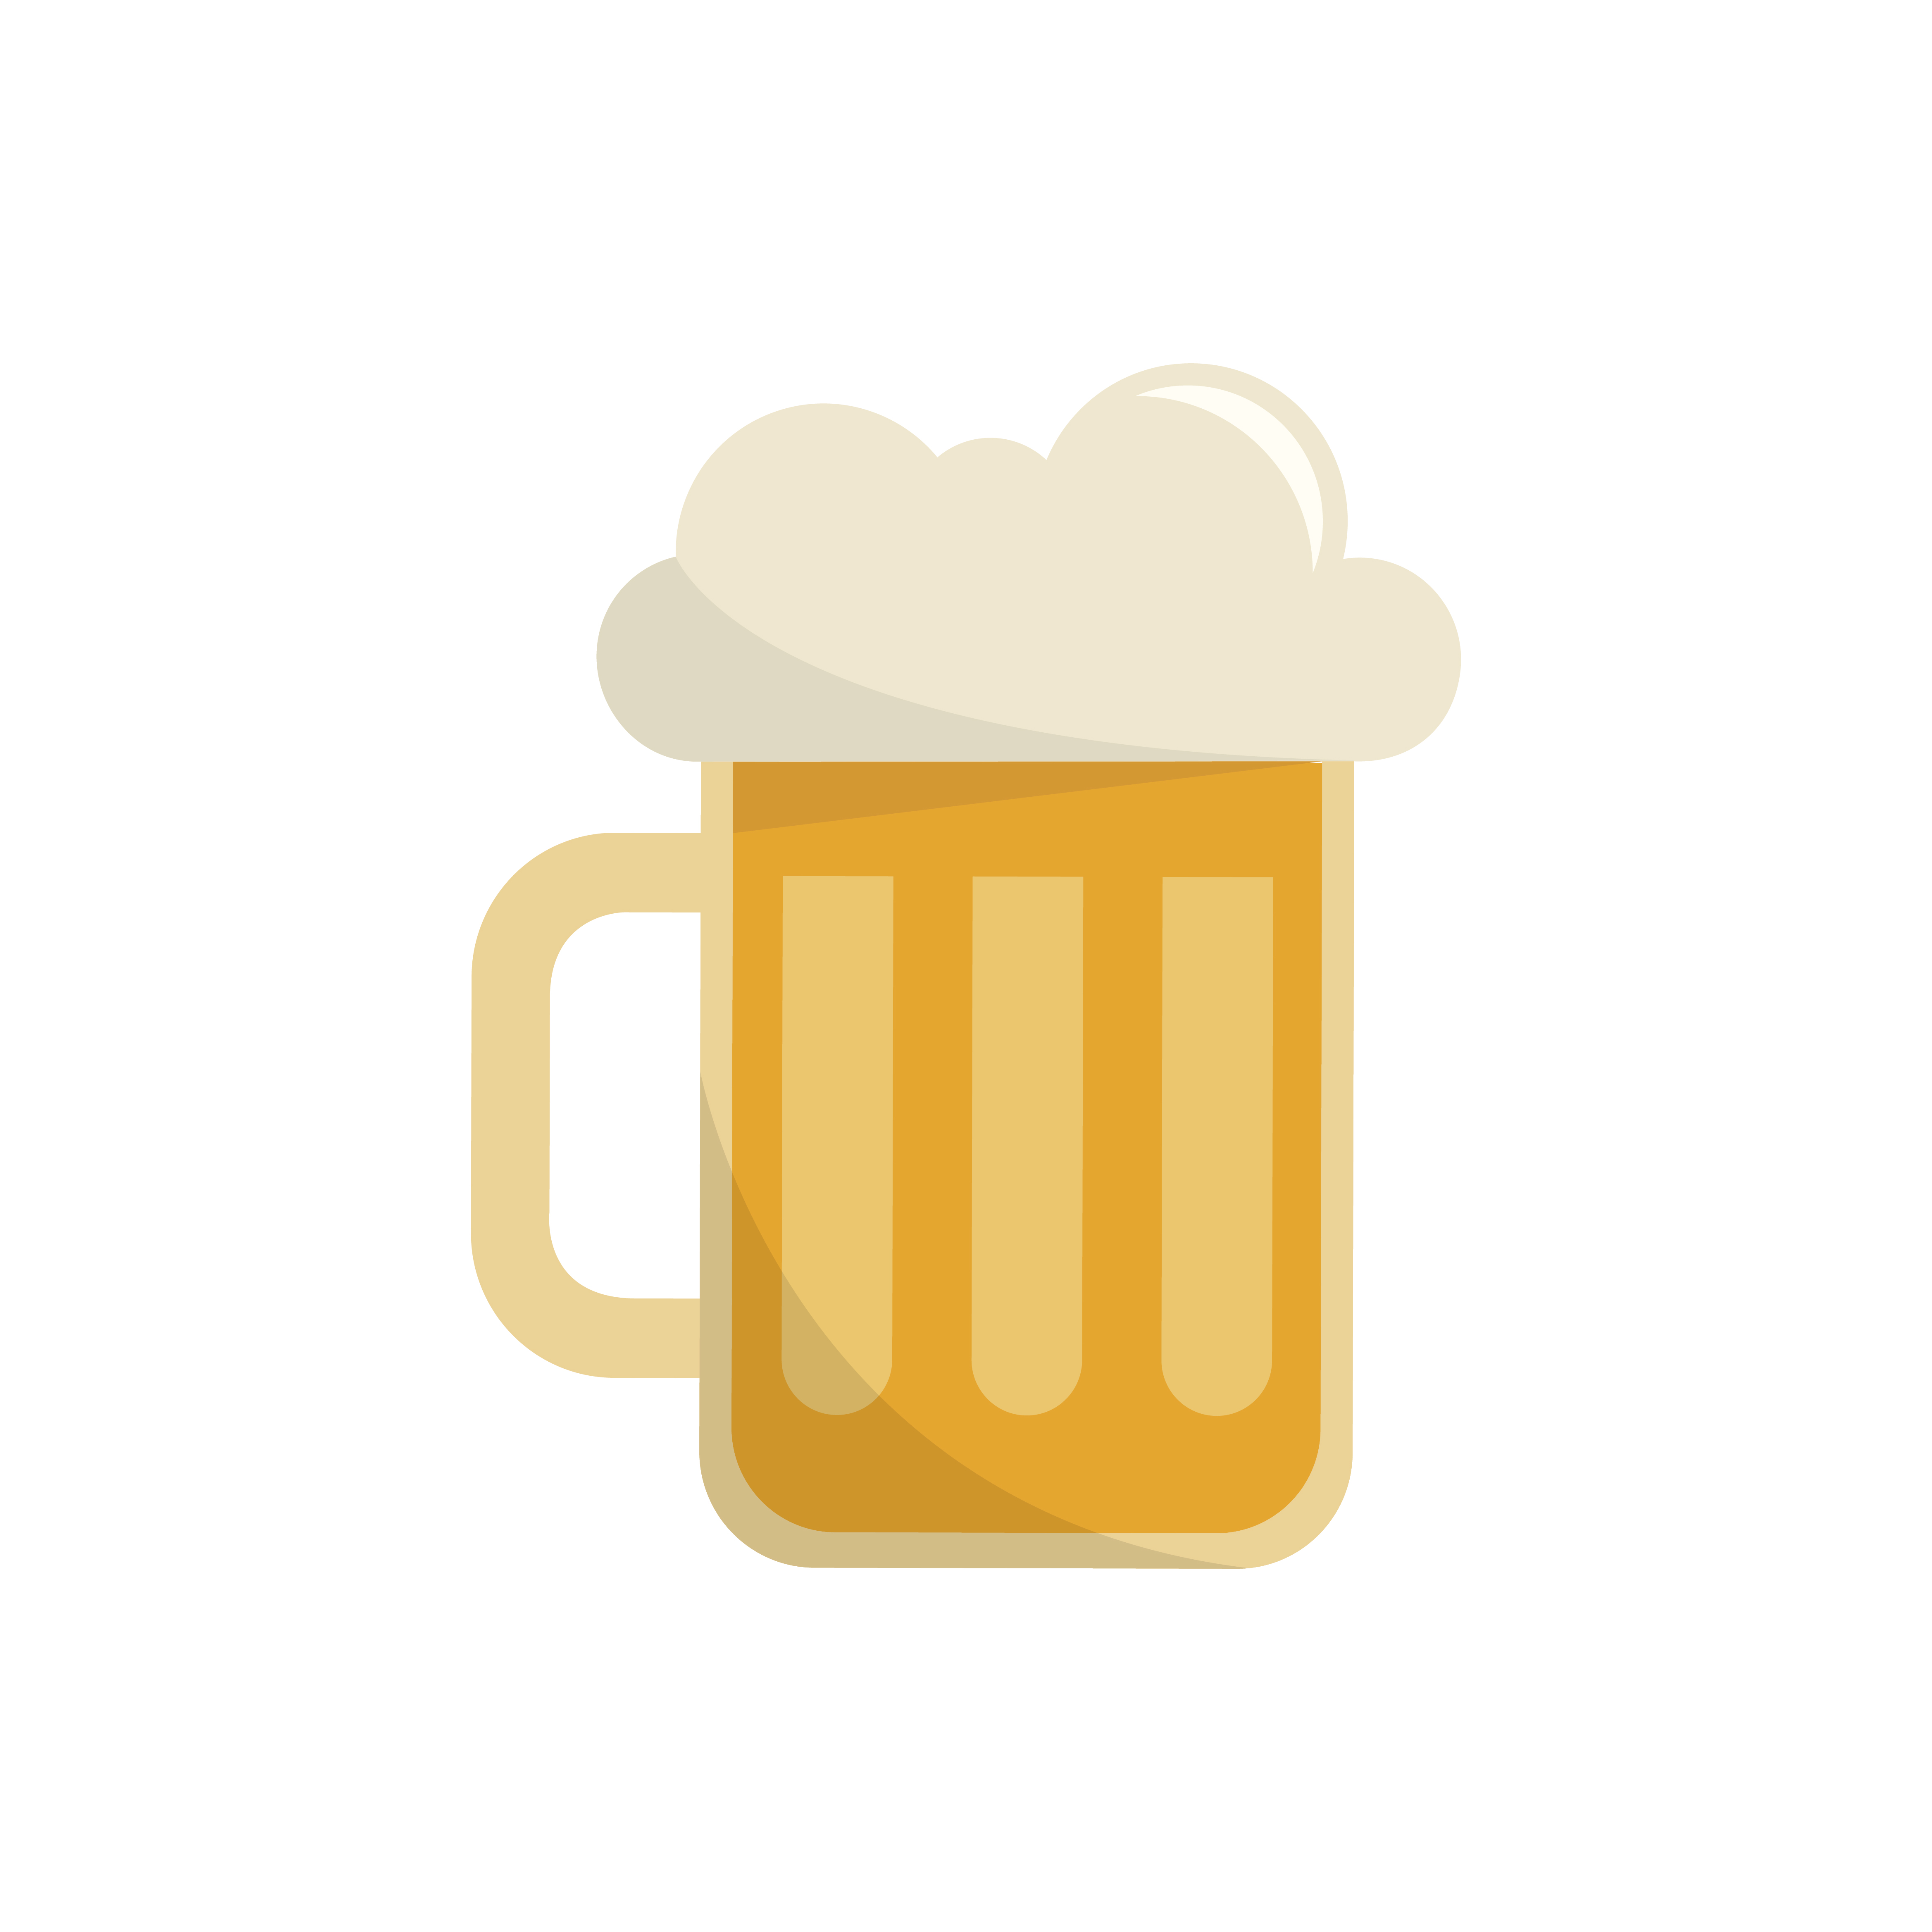 Beer mug isolated graphic illustration - Download Free Vectors, Clipart ...